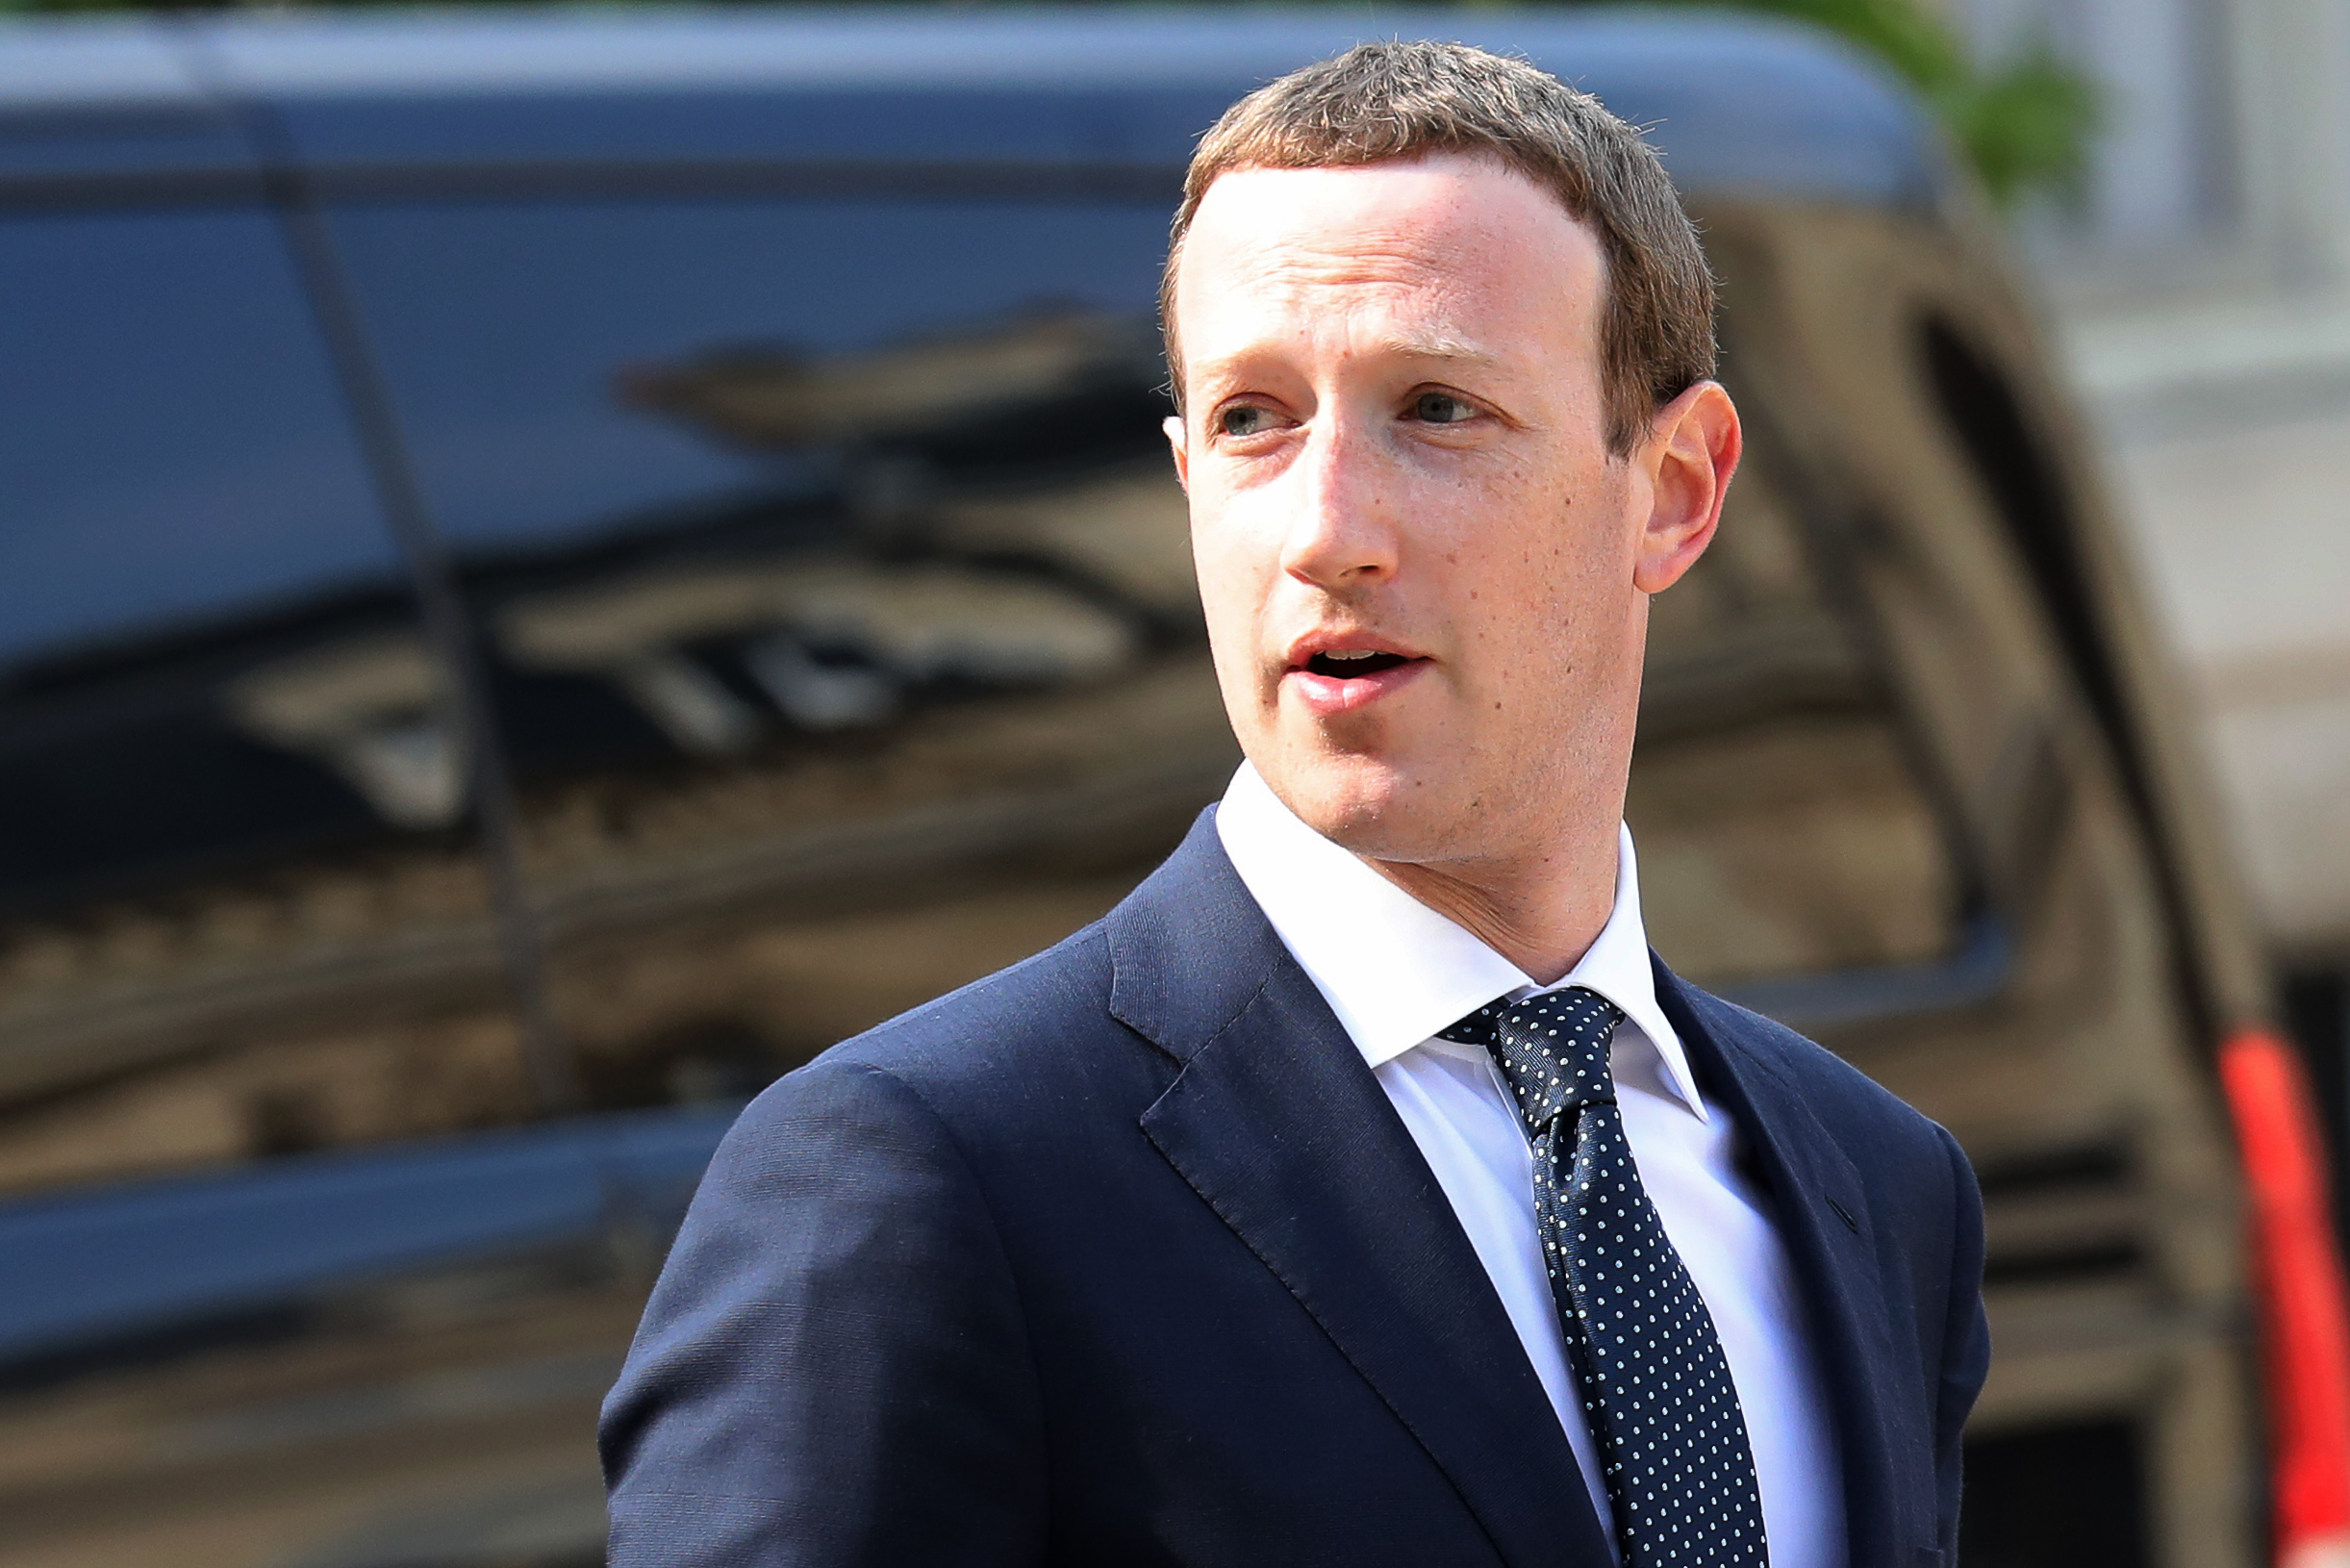 Facebook ceo mark zuckerberg waits for the french president in paris